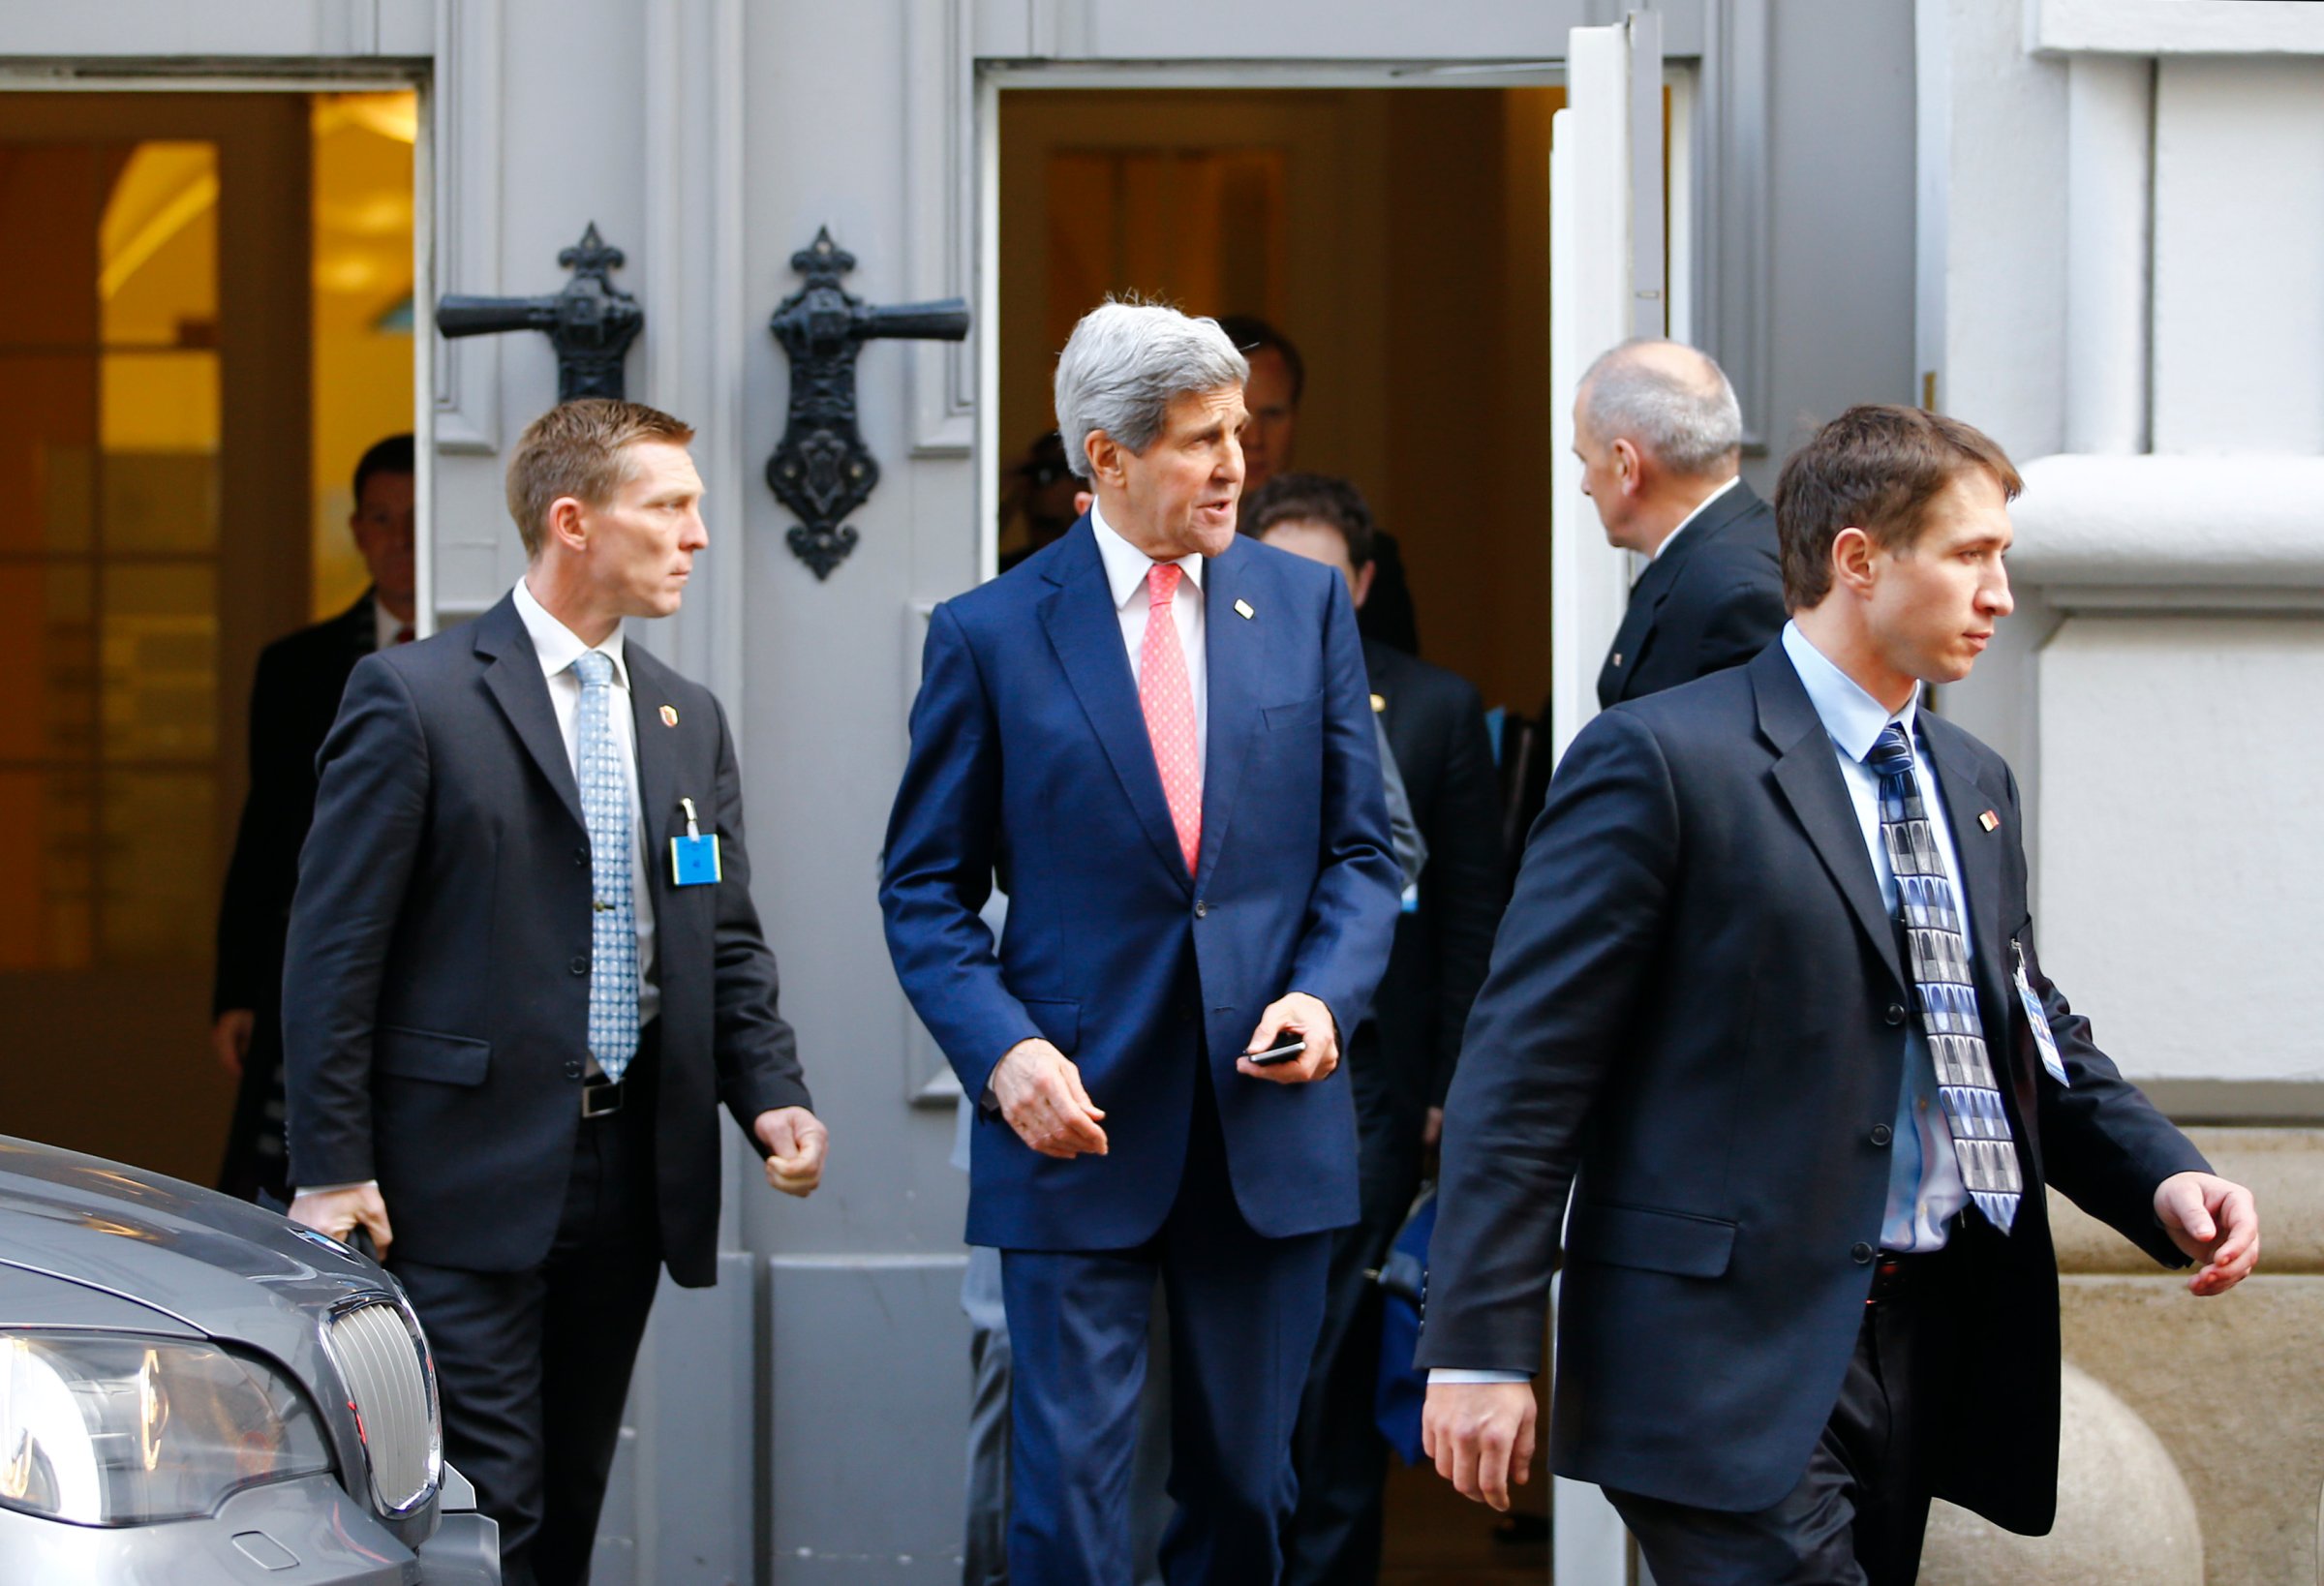 U.S. Secretary of State Kerry is surrounded by security as he leaves after a meeting in Vienna